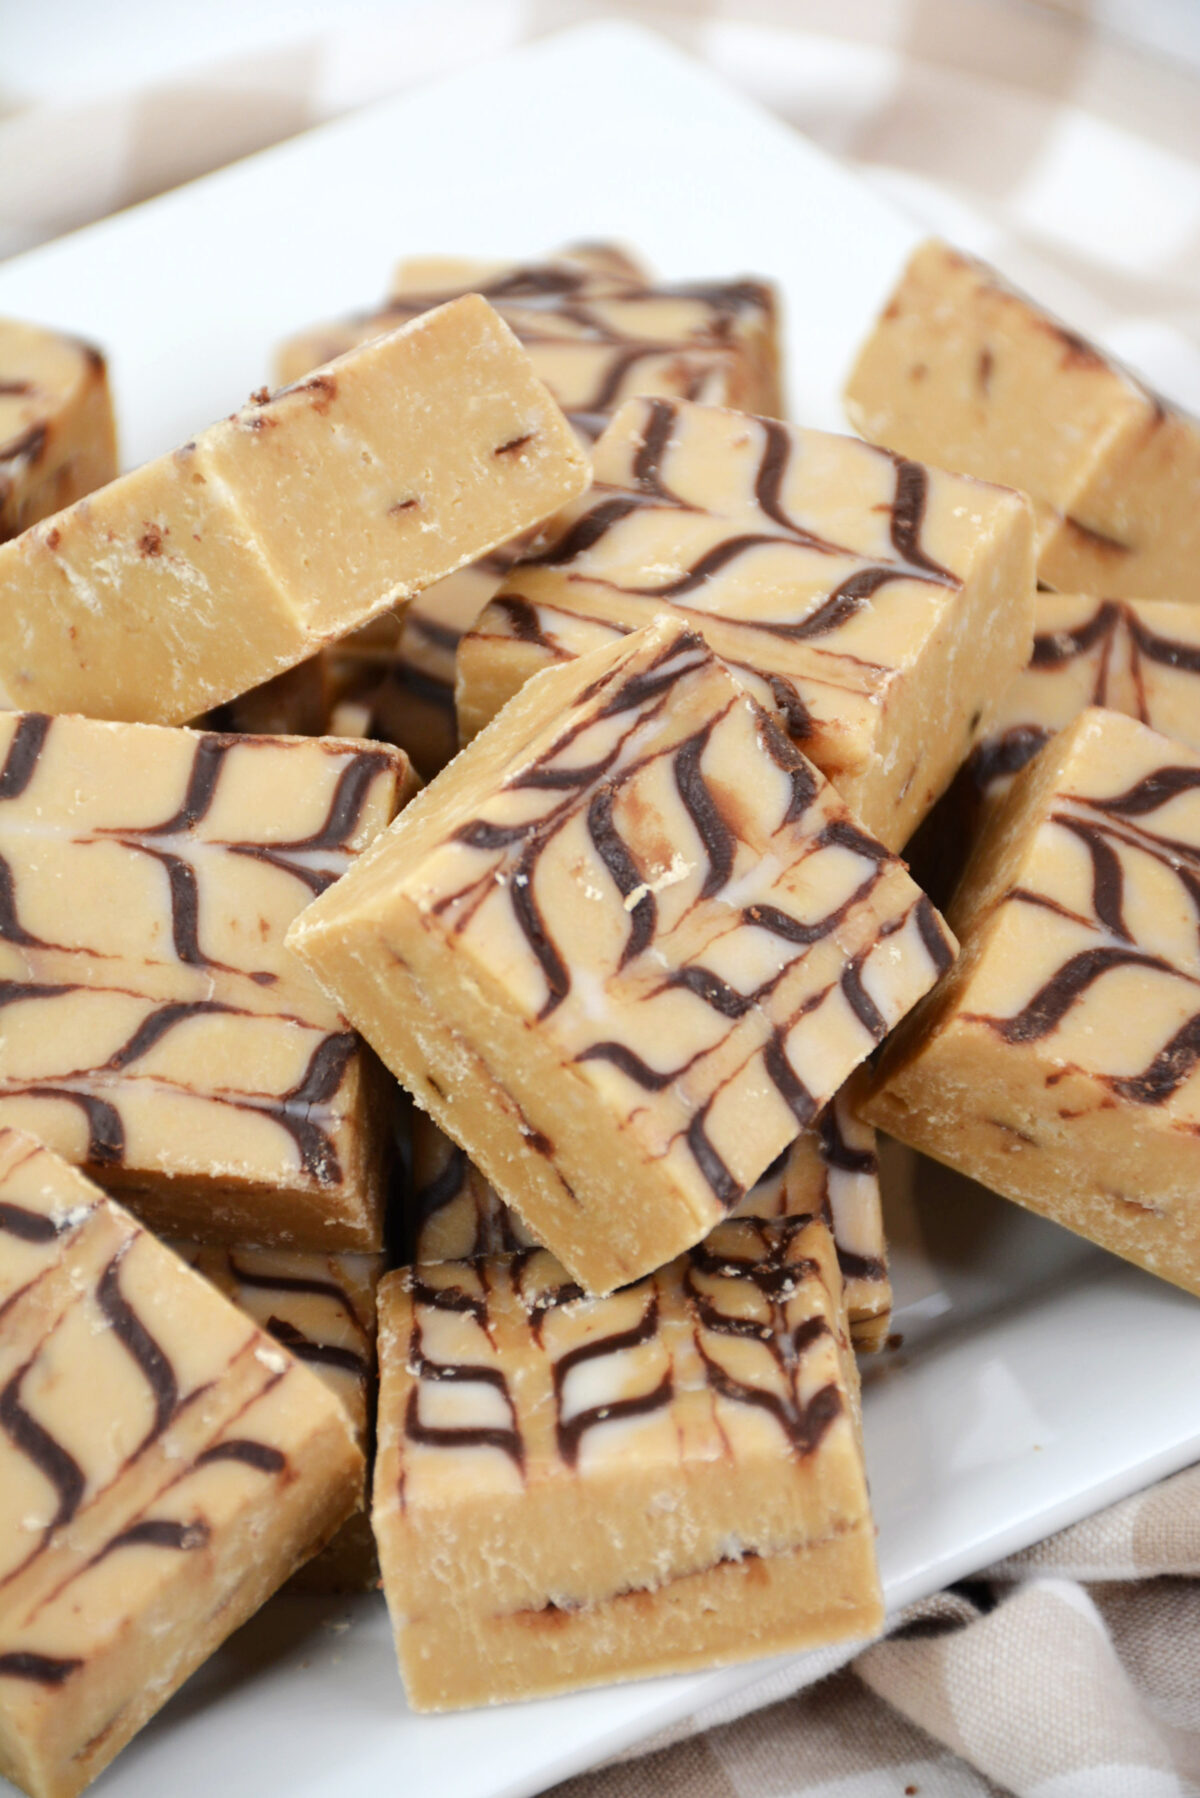 Whip up a batch of indulgent mocha rum fudge with this simple recipe. Perfect for any occasion, this treat is sure to impress!